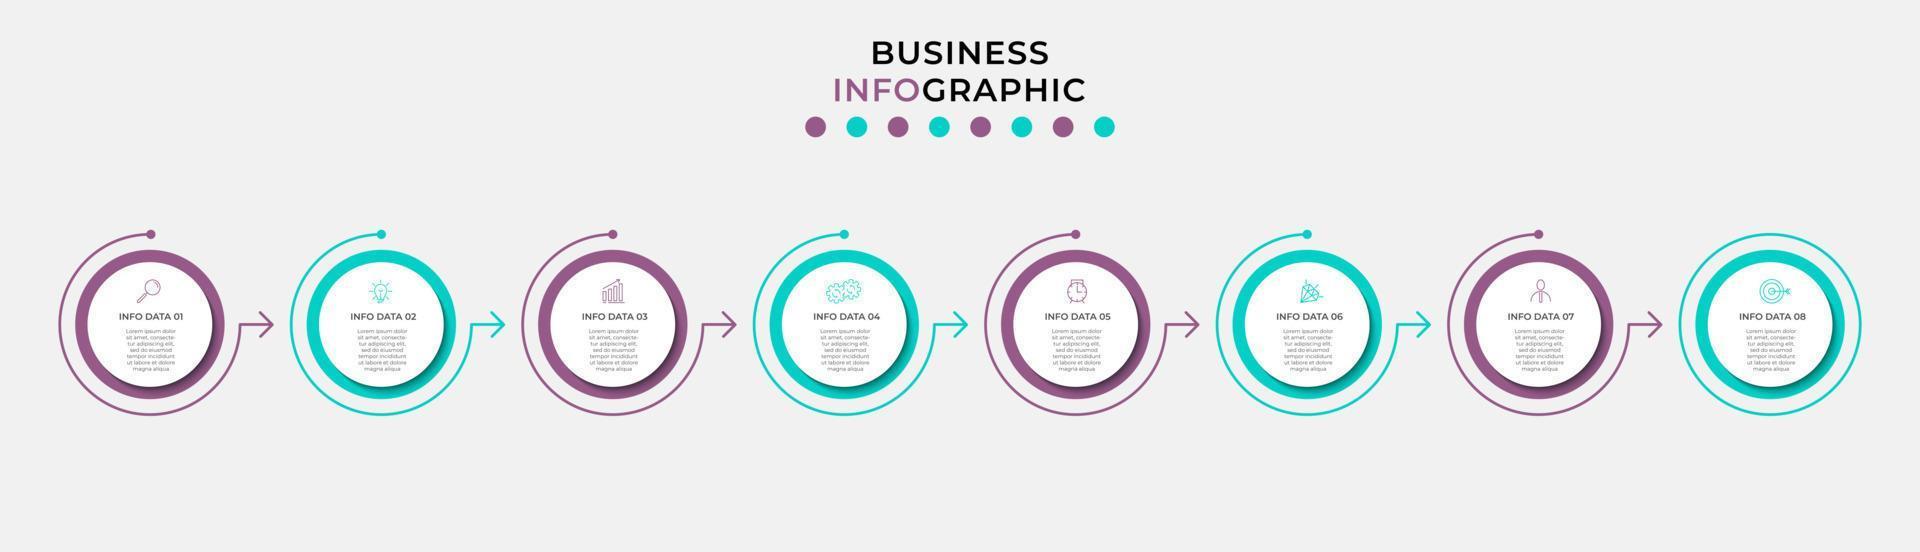 Vector Infographic design business template with icons and 8 options or steps. Can be used for process diagram, presentations, workflow layout, banner, flow chart, info graph